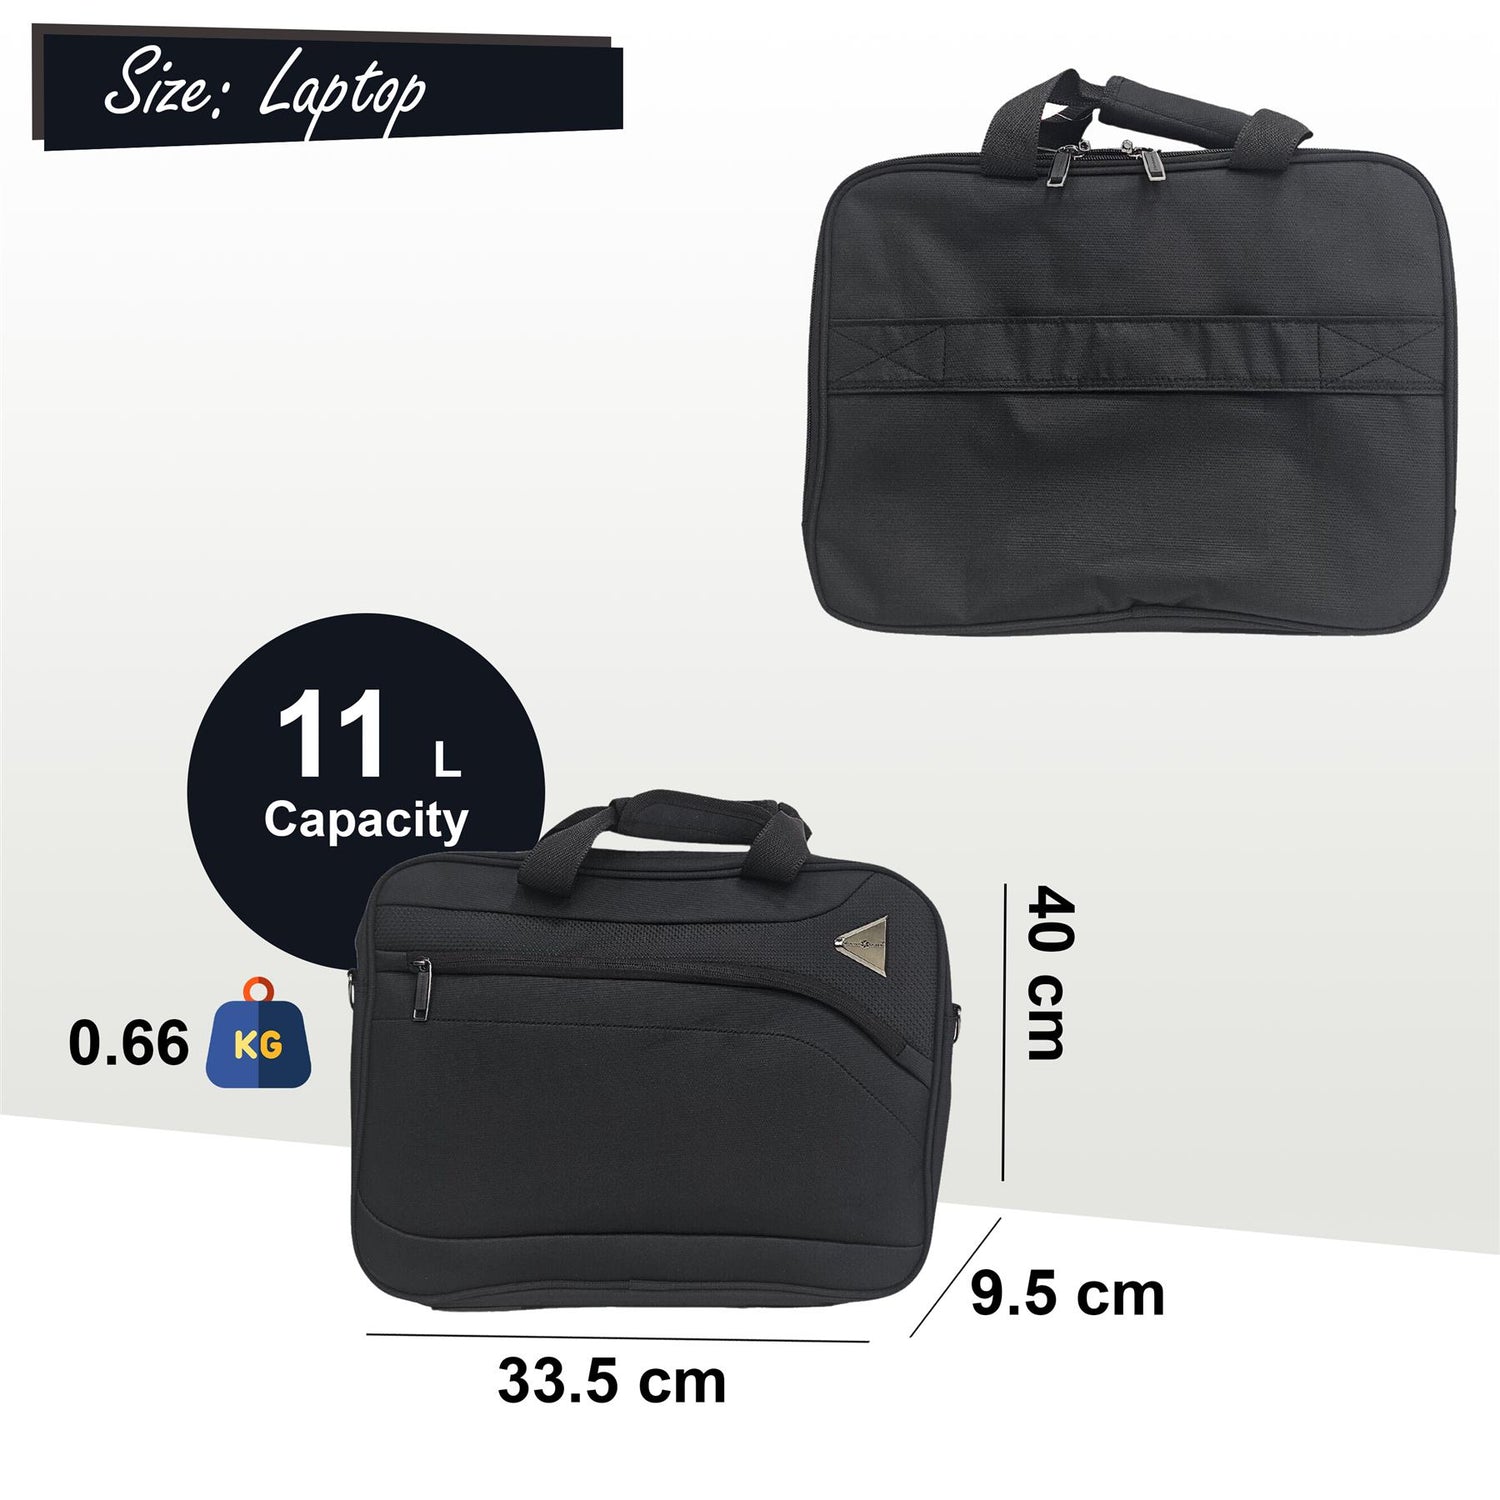 Clayton Laptop Soft Shell Suitcase in Black